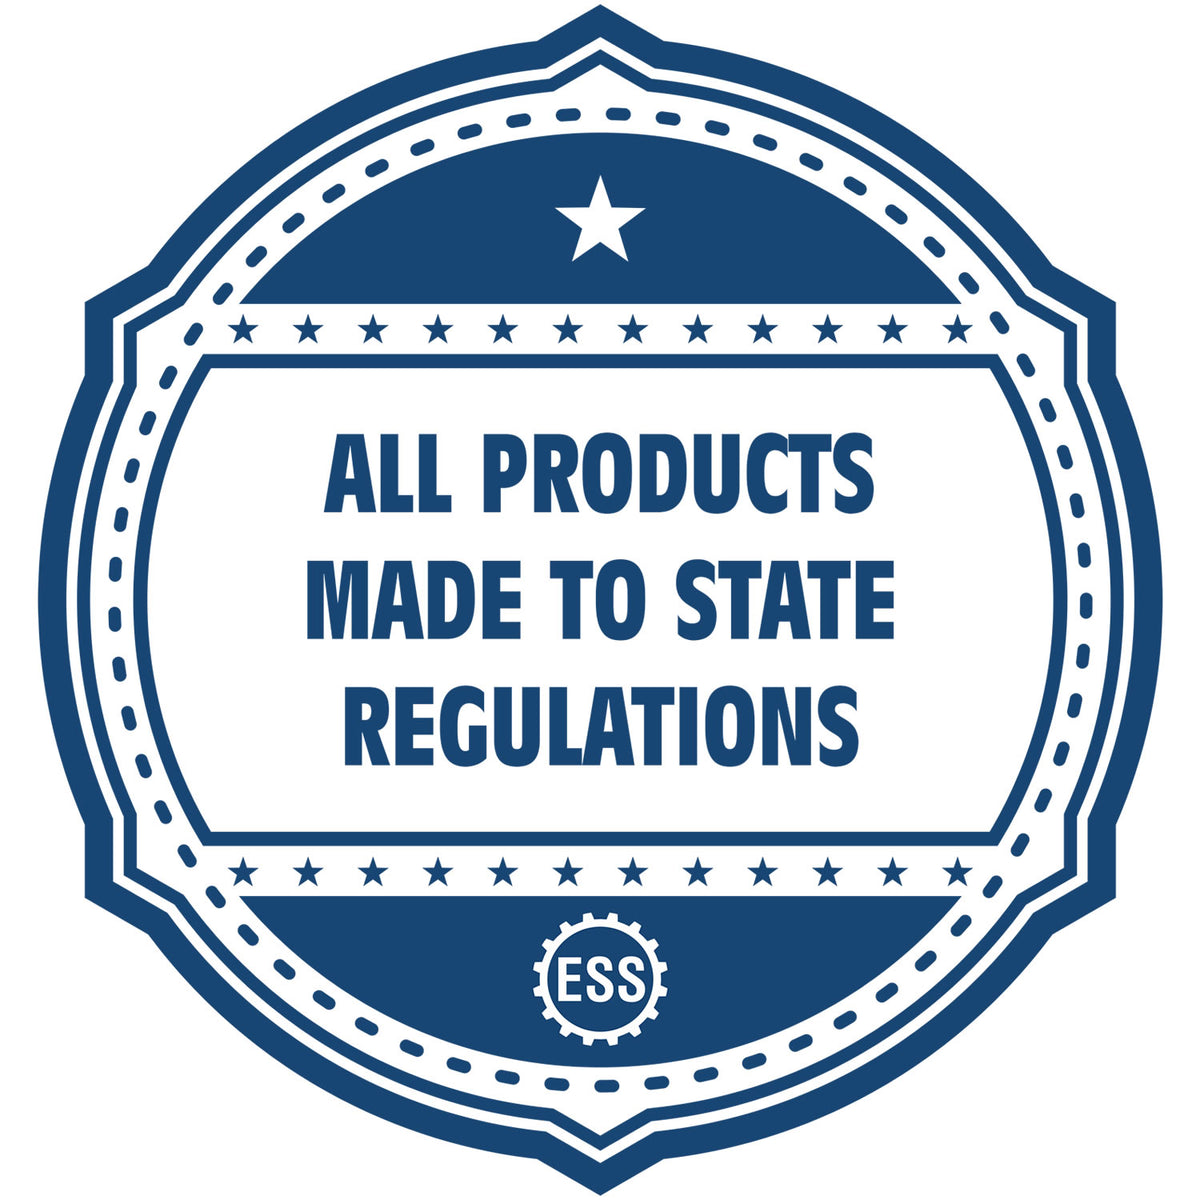 An icon or badge element for the Premium MaxLight Pre-Inked Montana Engineering Stamp showing that this product is made in compliance with state regulations.